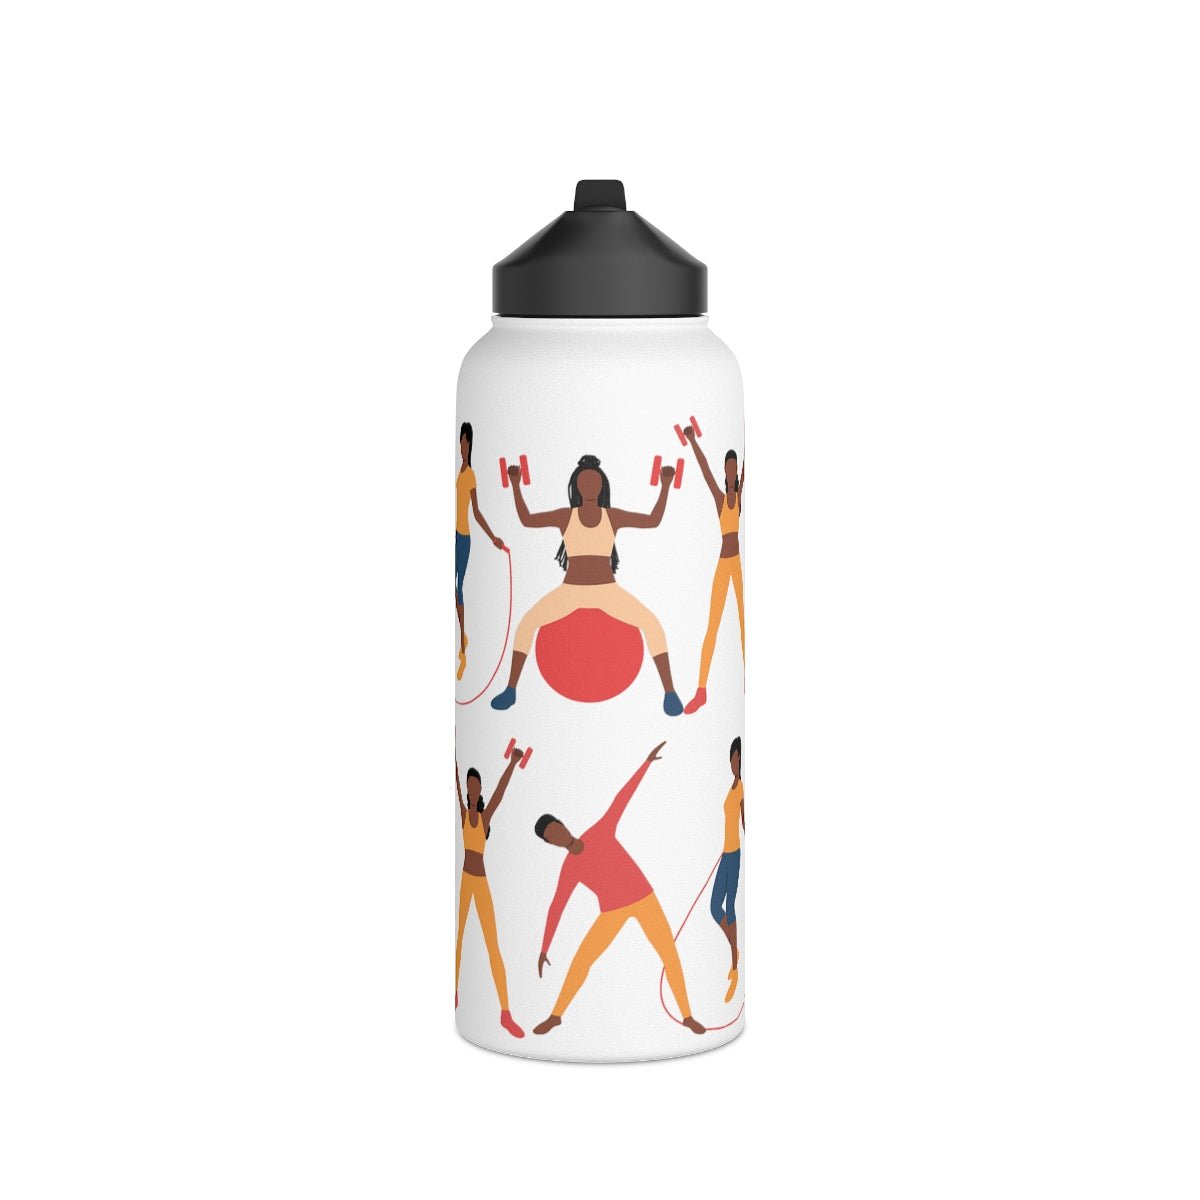 Fitness 32oz Stainless Steel Water Bottle - The Trini Gee